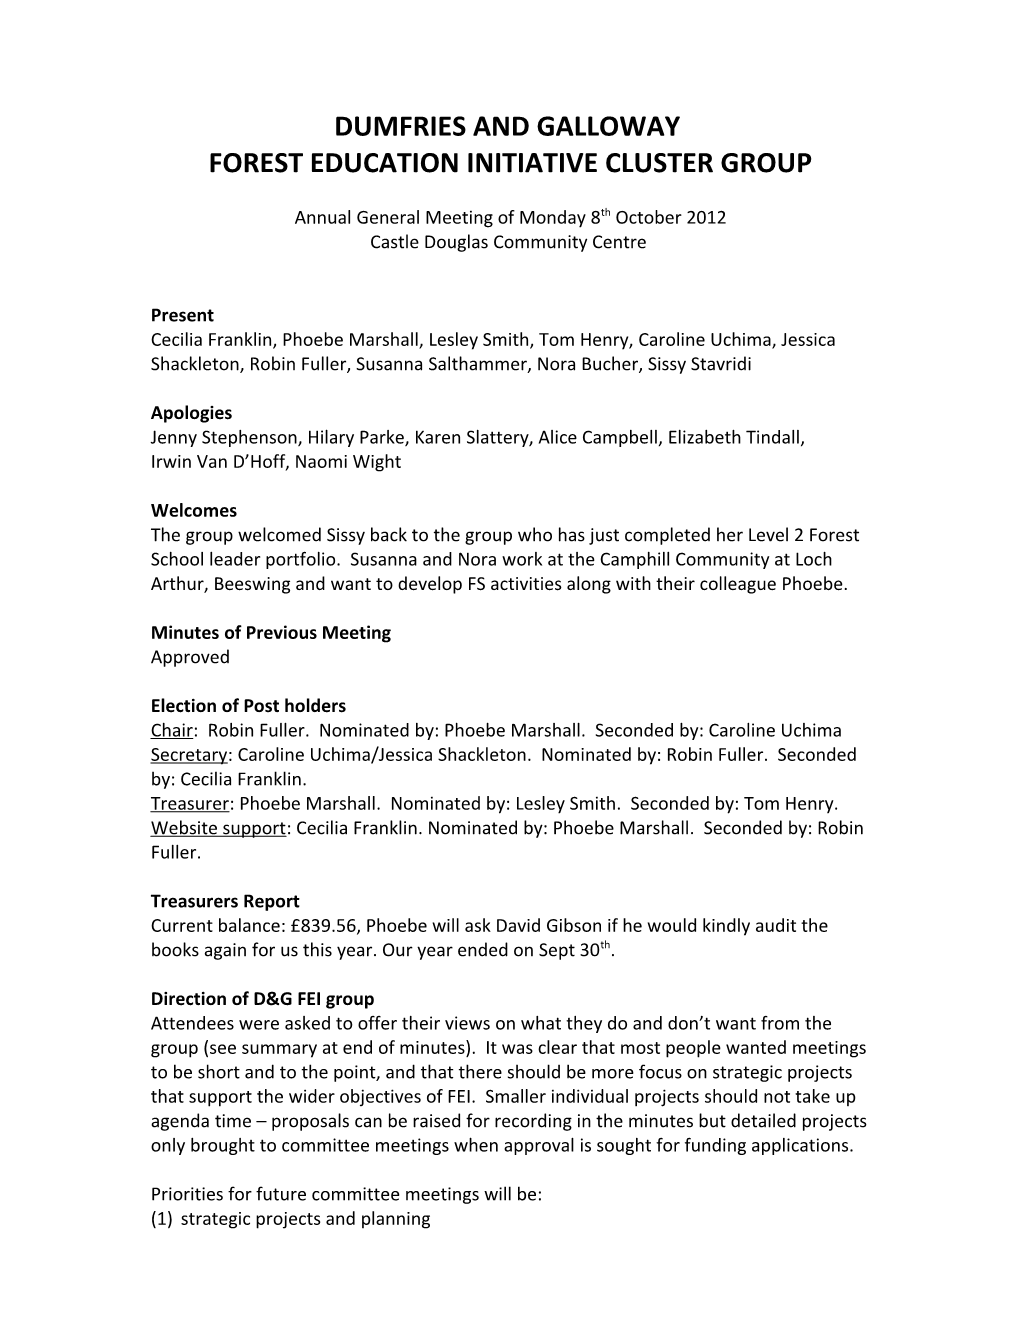 Dumfries and Galloway Forest Education Initiative Cluster Group s1